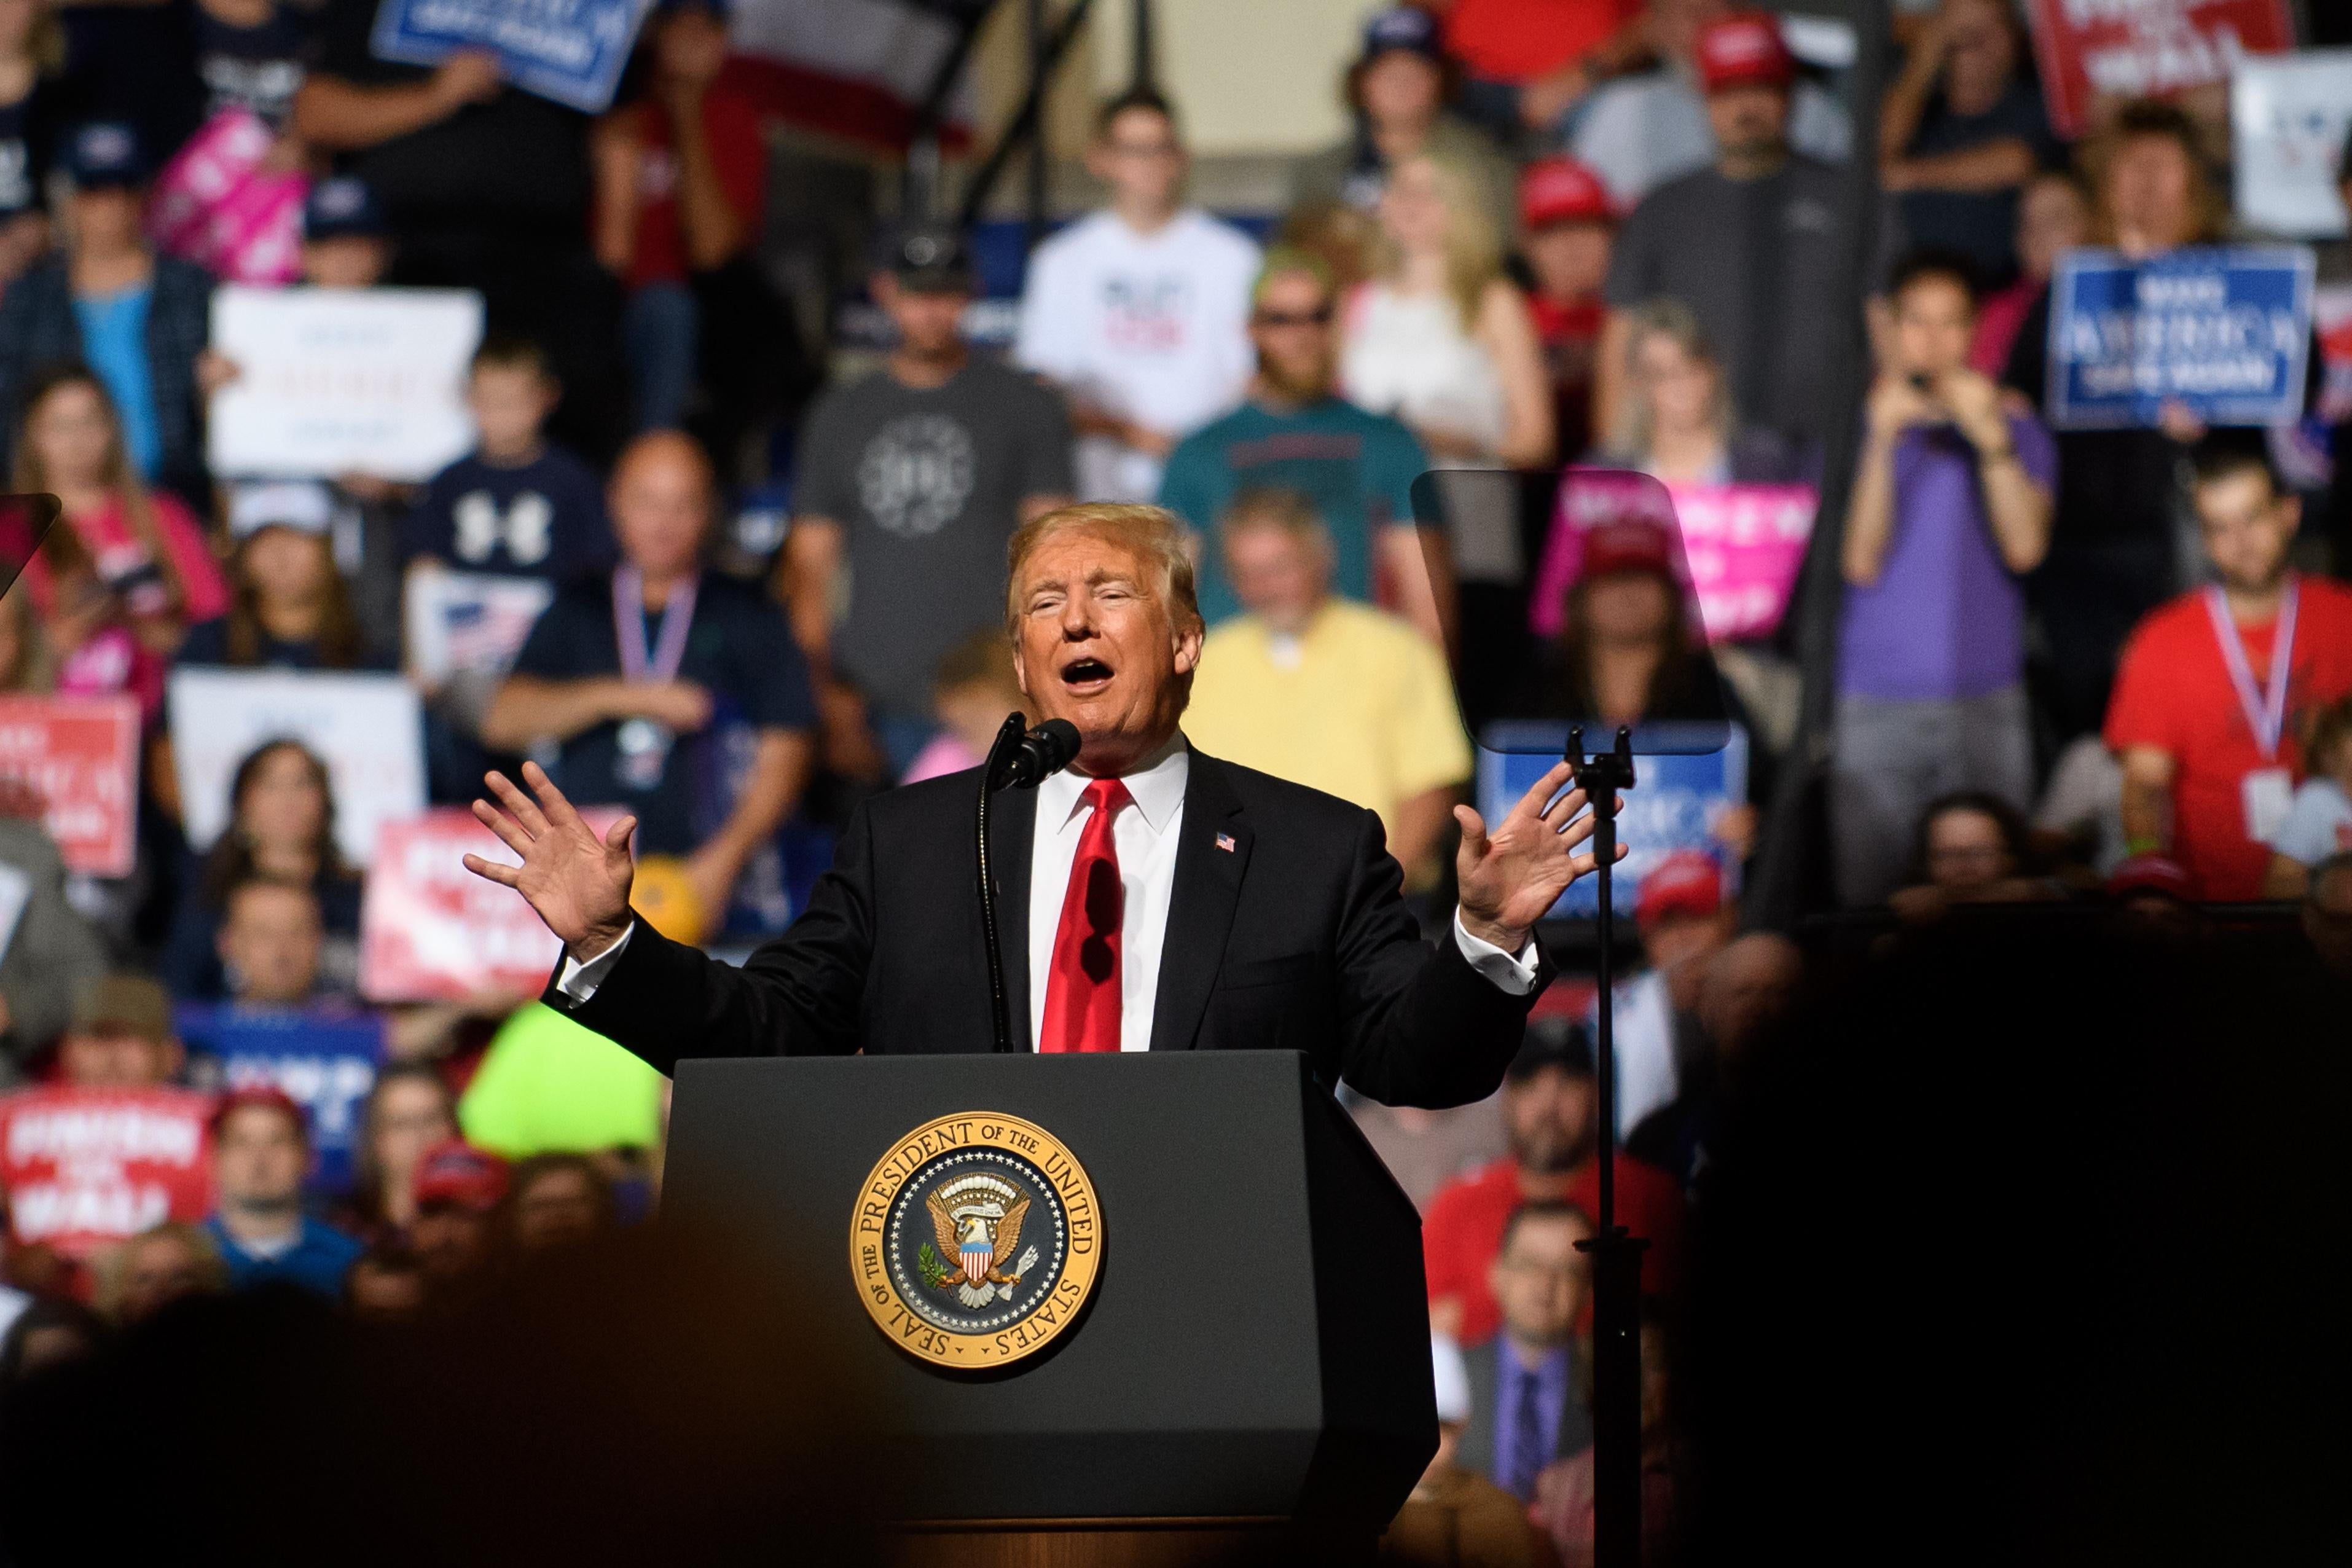 President Donald J. Trump speaks to supporters at a rally inside the WesBanco Arena on September 29, 2018 in Wheeling, West Virginia. 